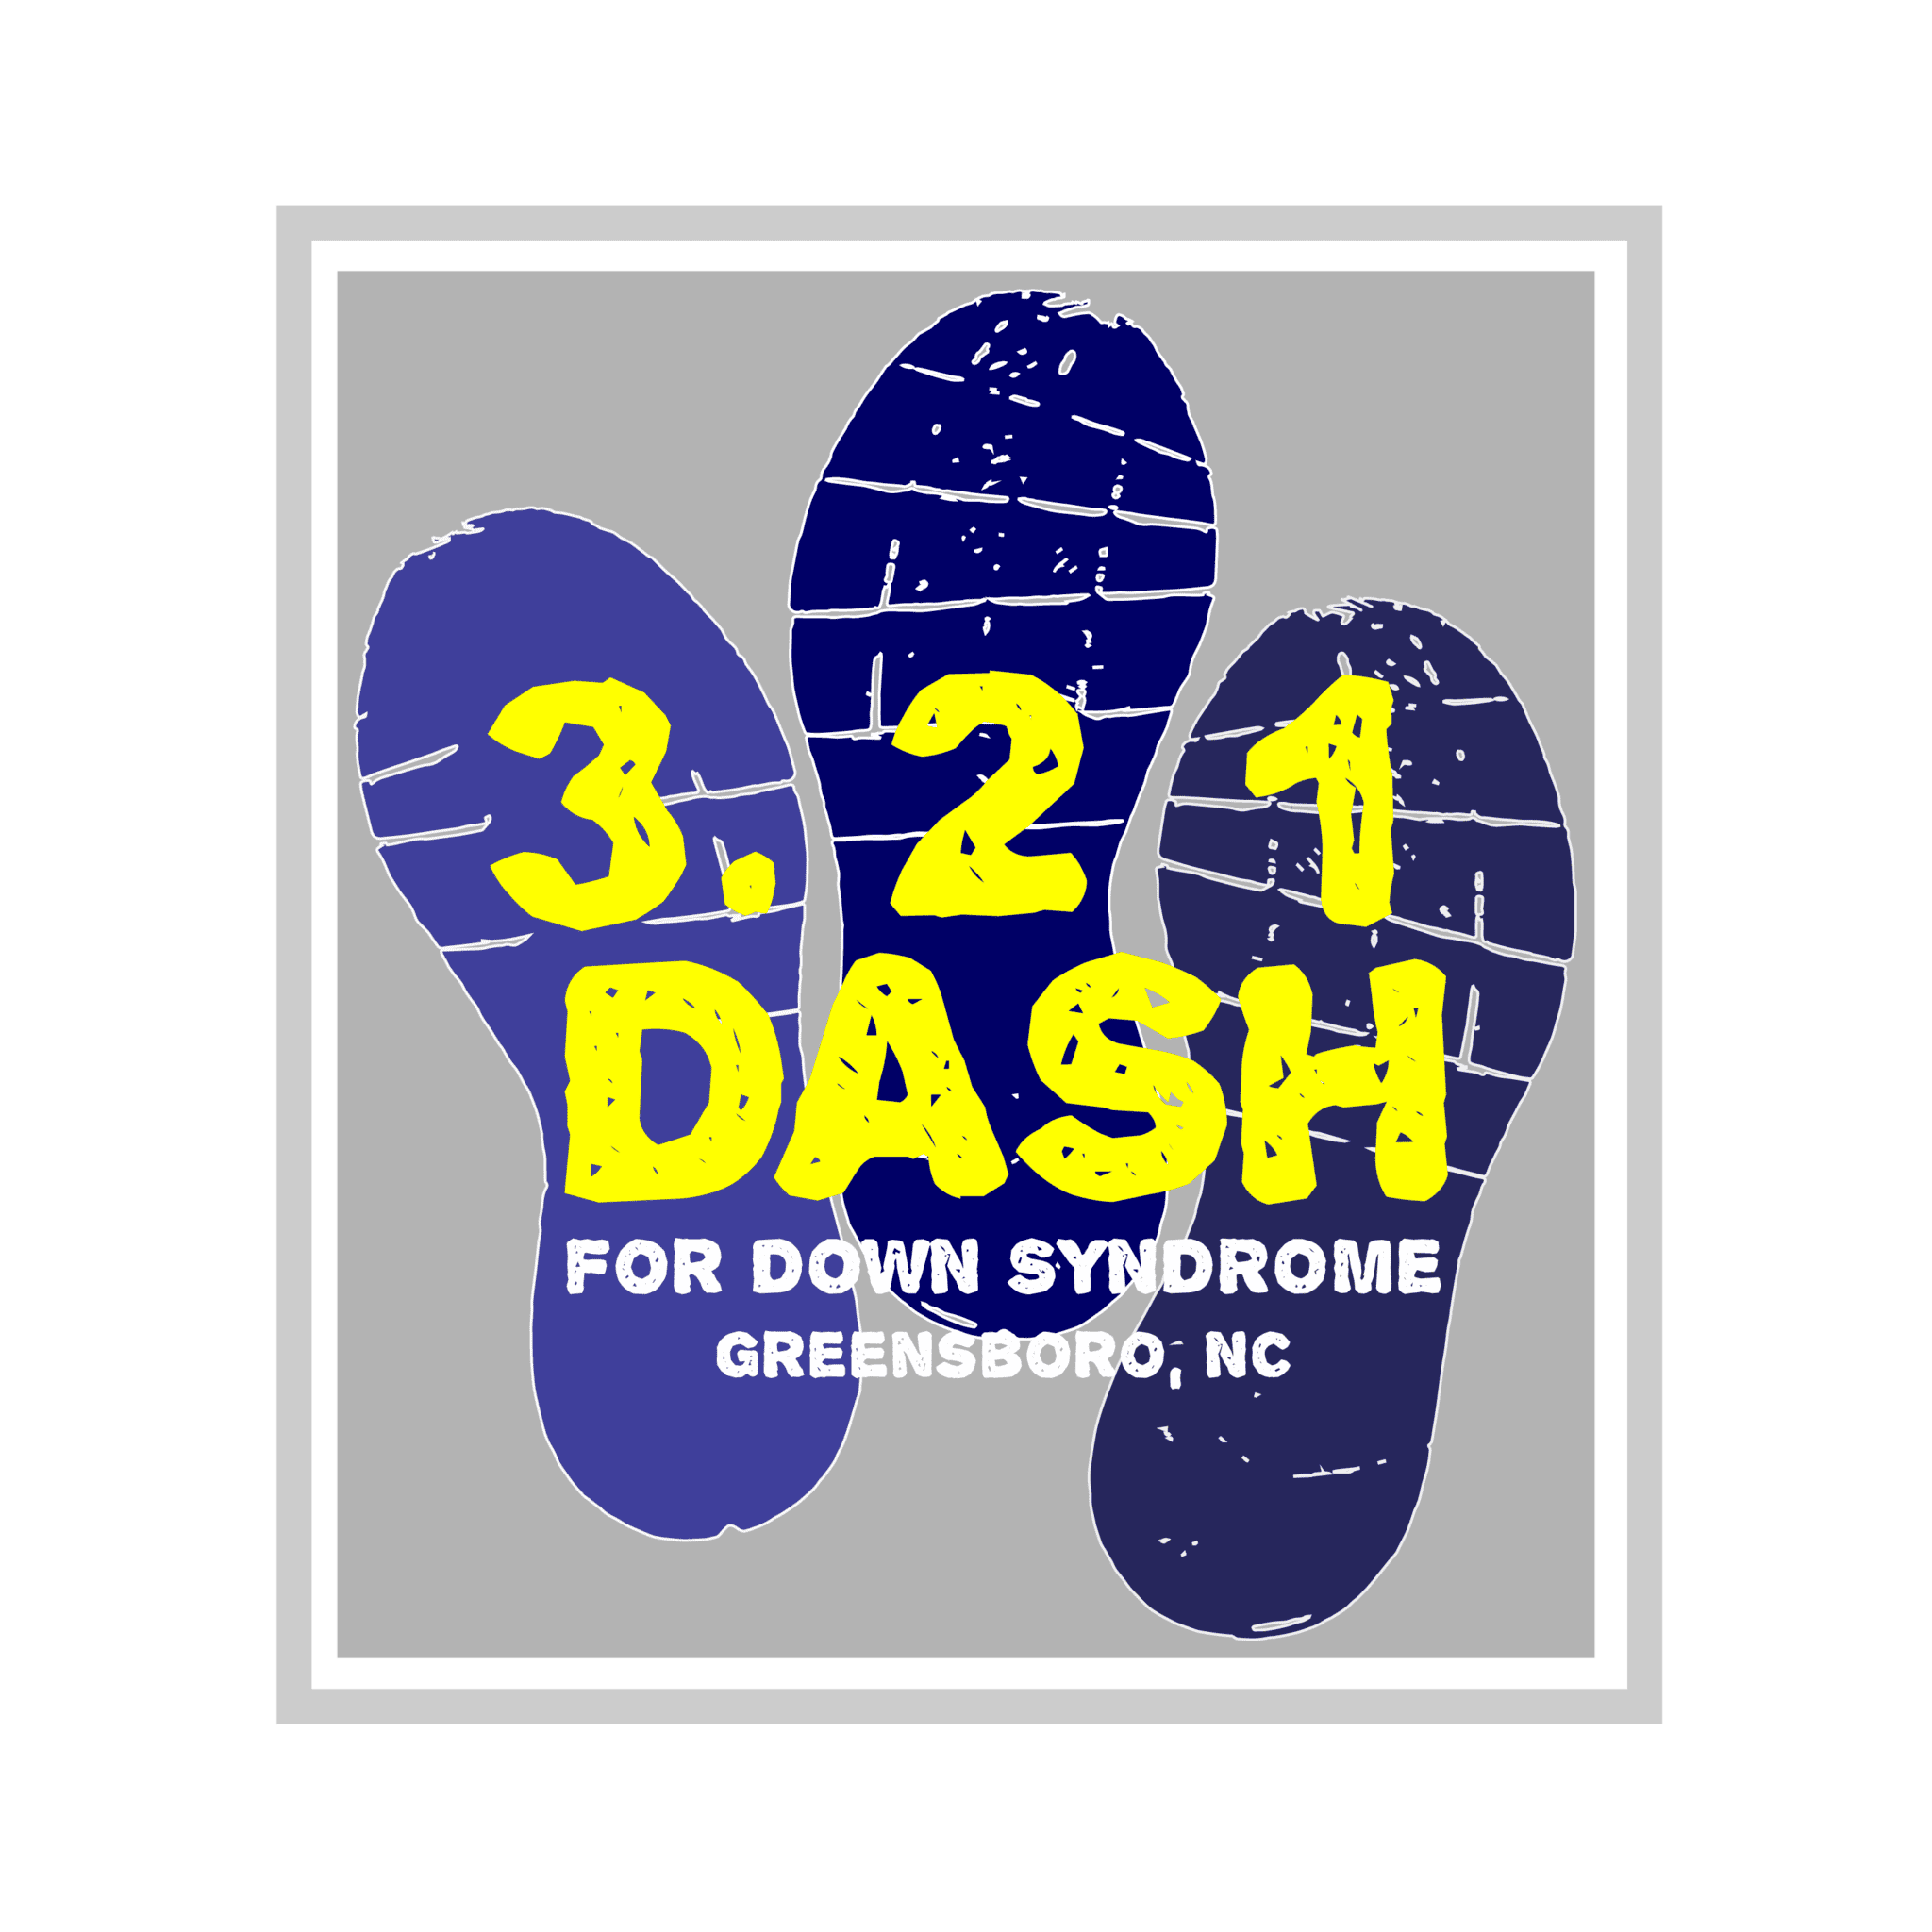 3.21 Dash for Down Syndrome Greensboro logo on RaceRaves